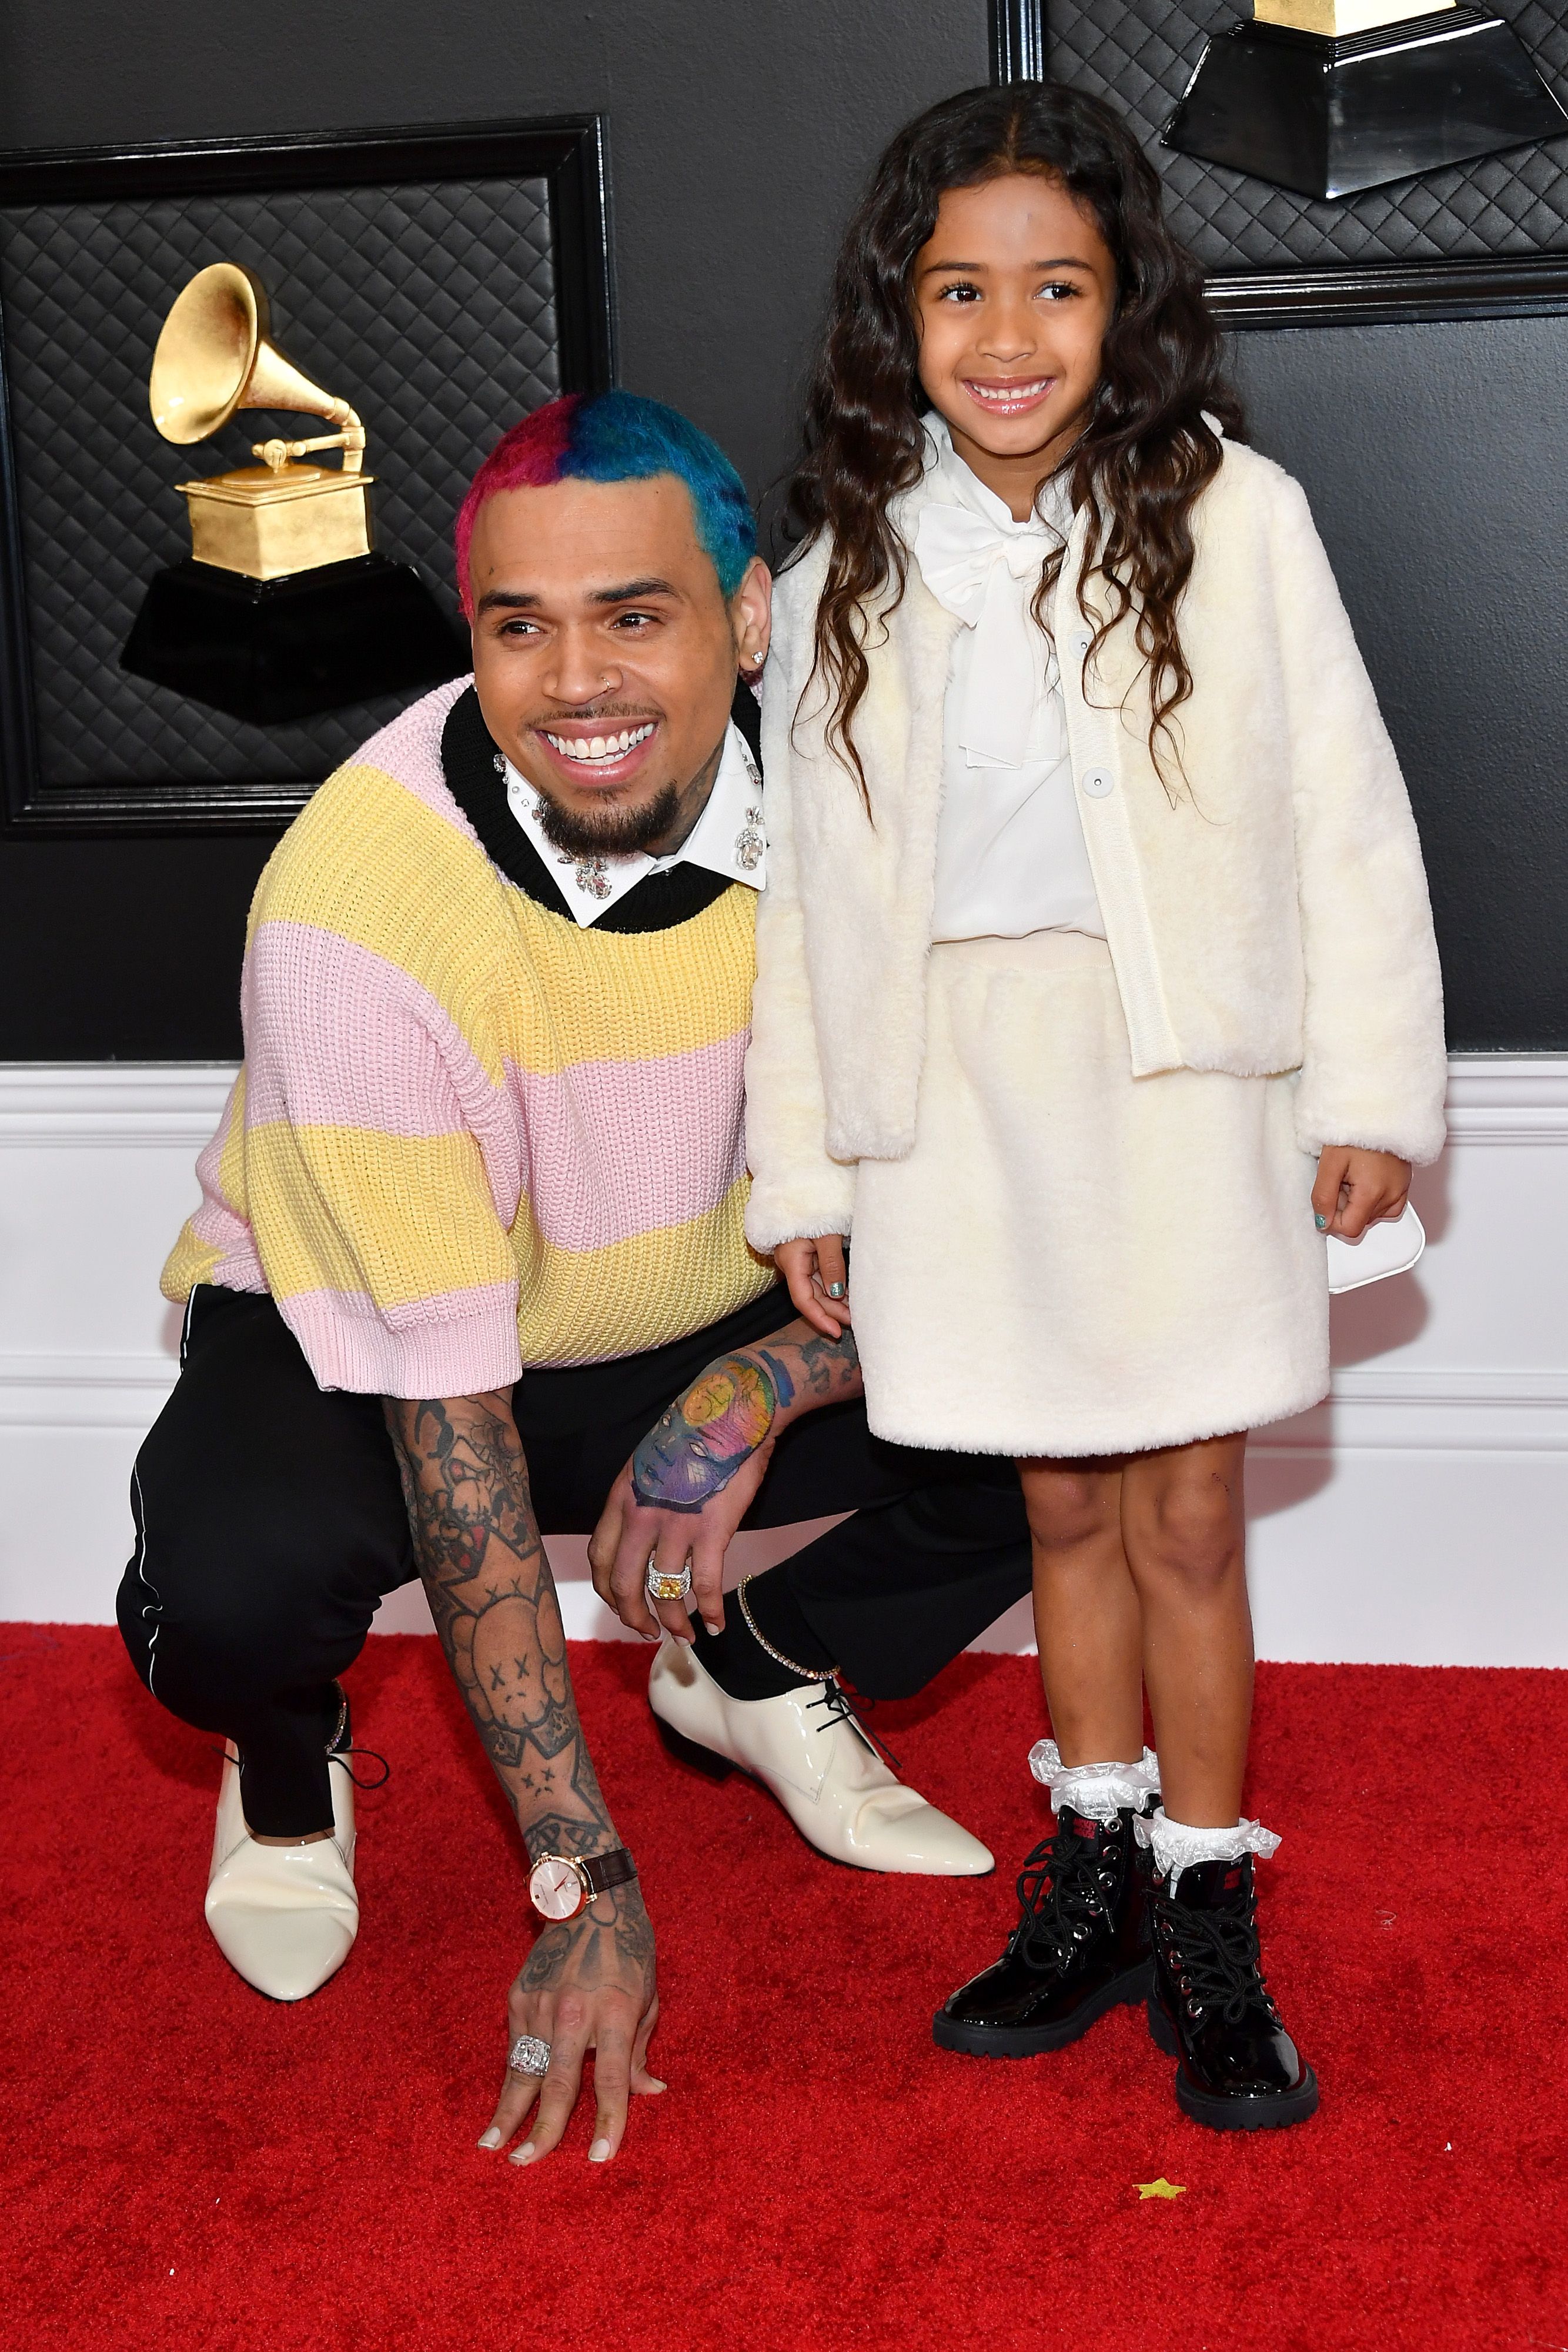 Chris Brown and Royalty Brown during the 62nd Annual Grammy Awards at Staples Center on January 26, 2020 in Los Angeles, California. | Source: Getty Images